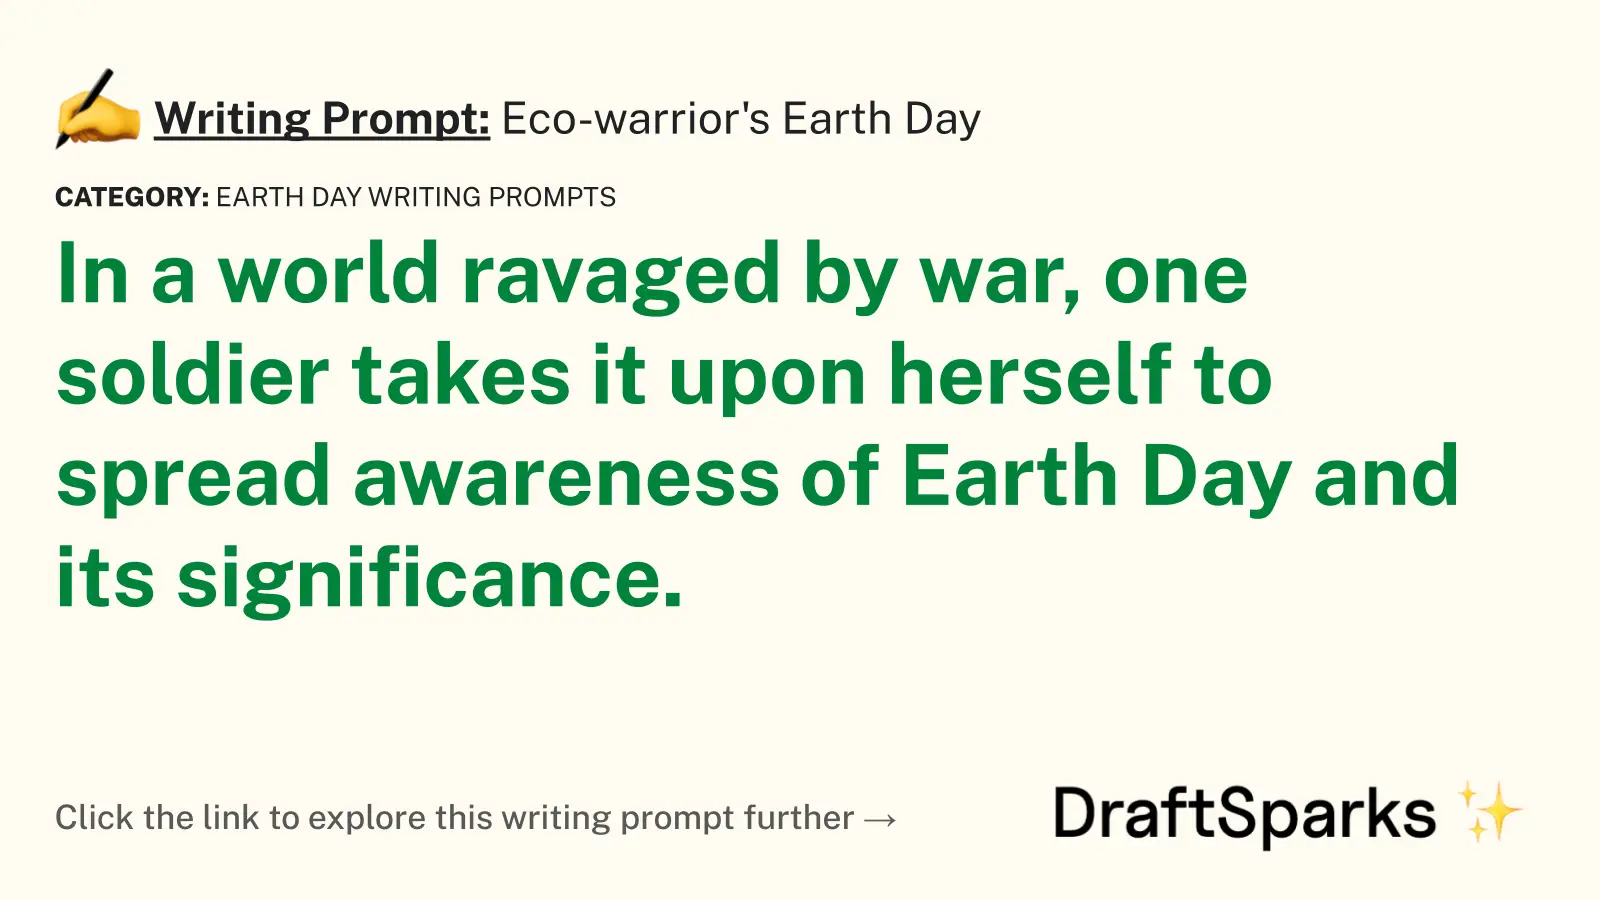 Eco-warrior’s Earth Day